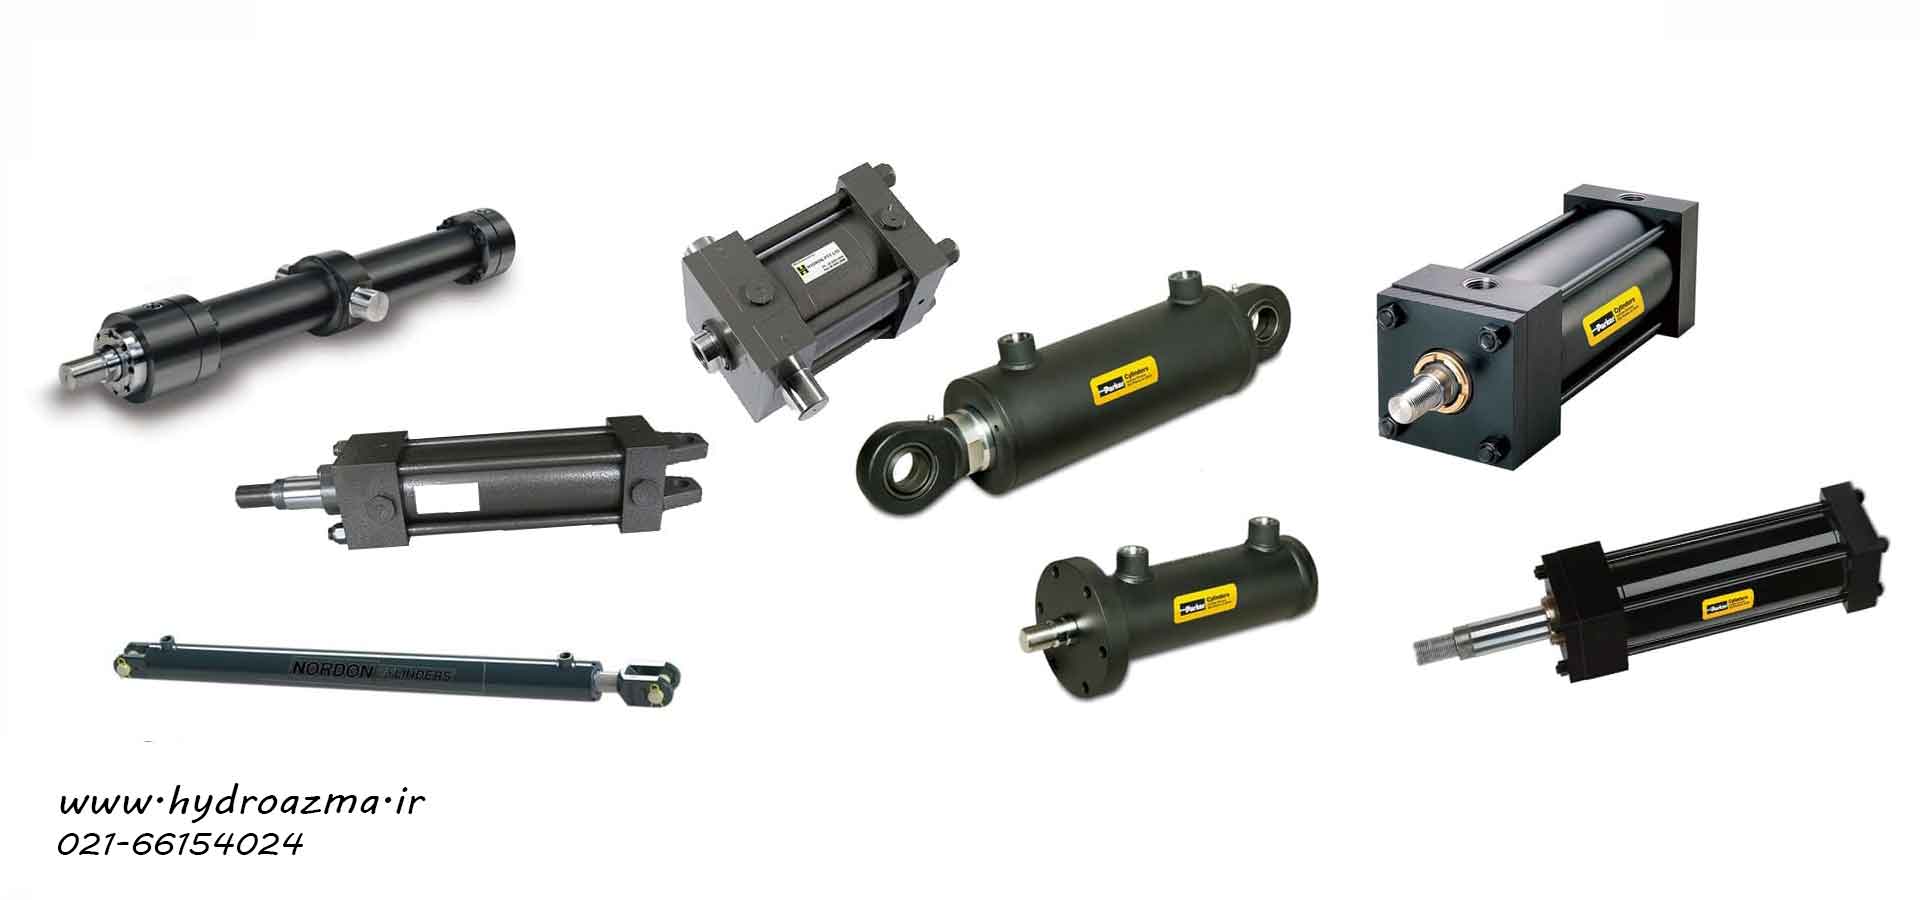 What is a hydraulic cylinder?